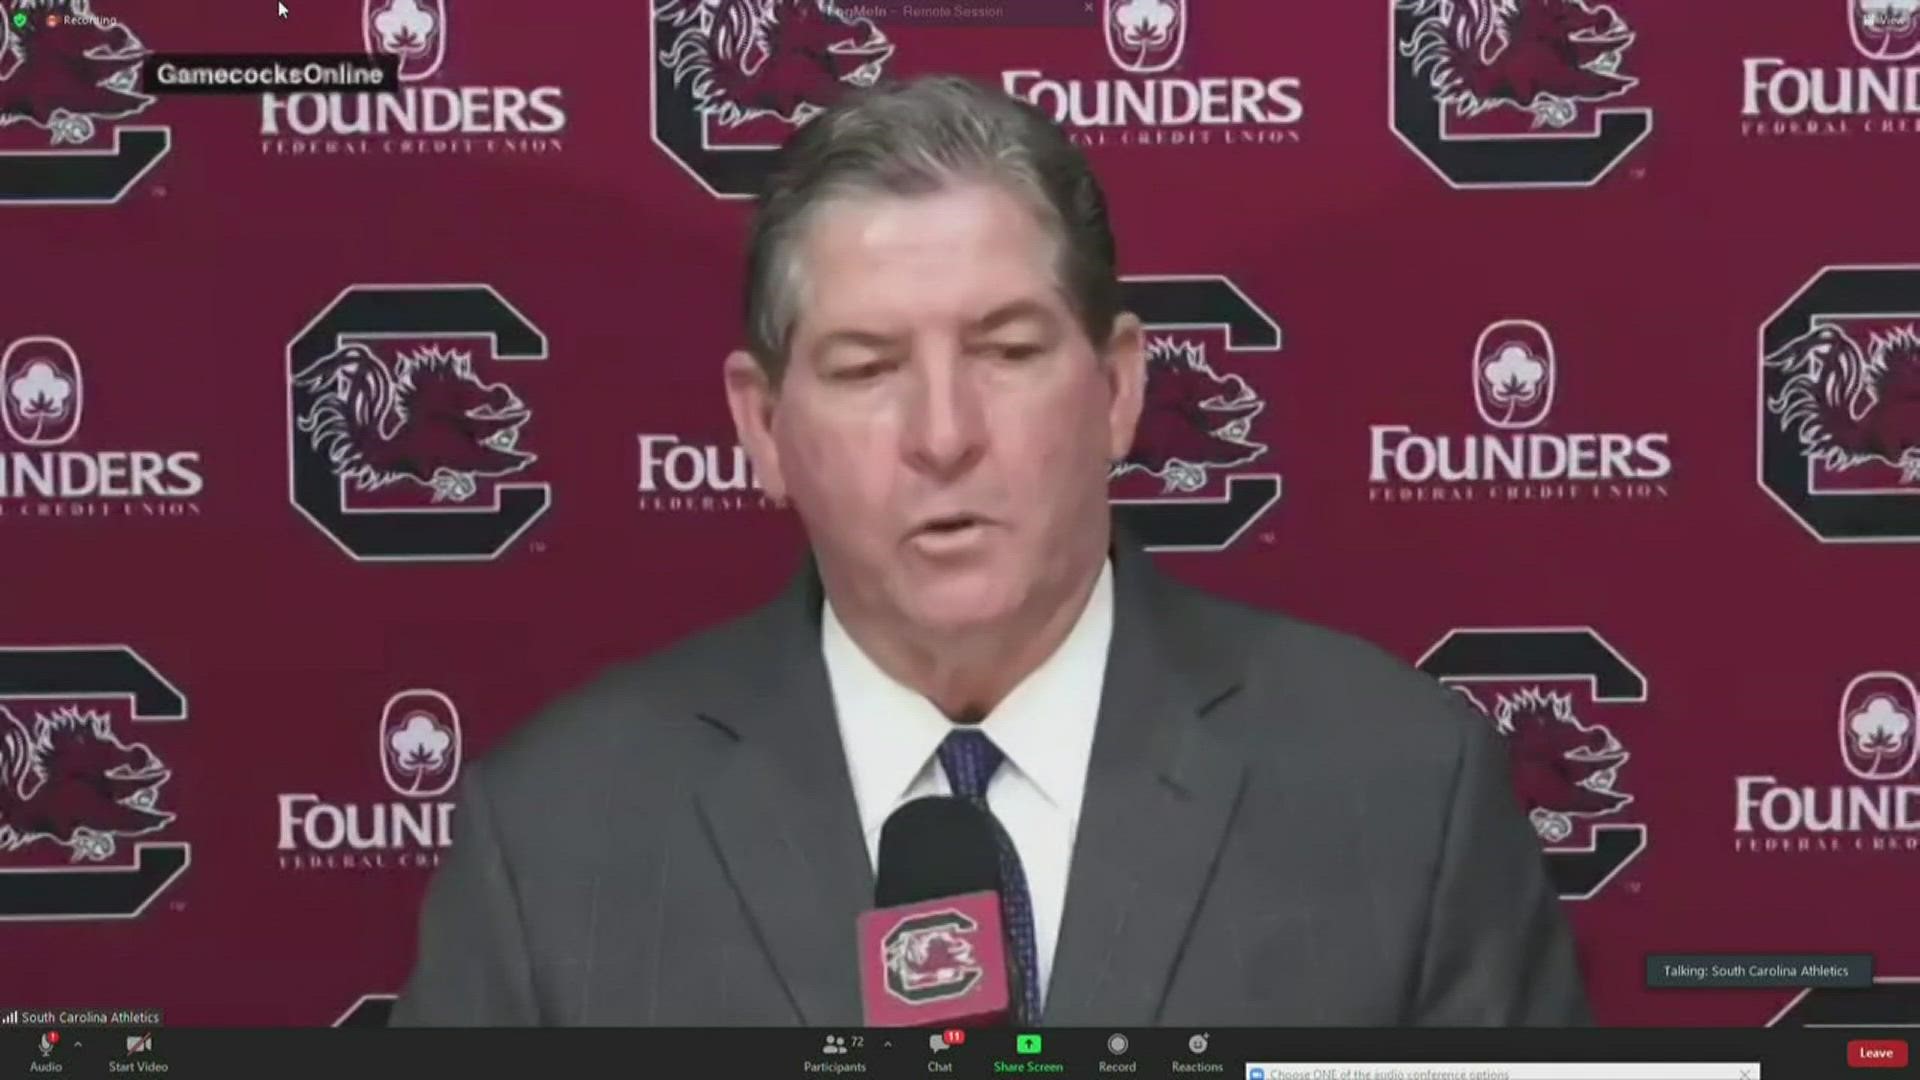 South Carolina Athletics Director Ray Tanner discussed the decision to fire Head Coach Will Muschamp.